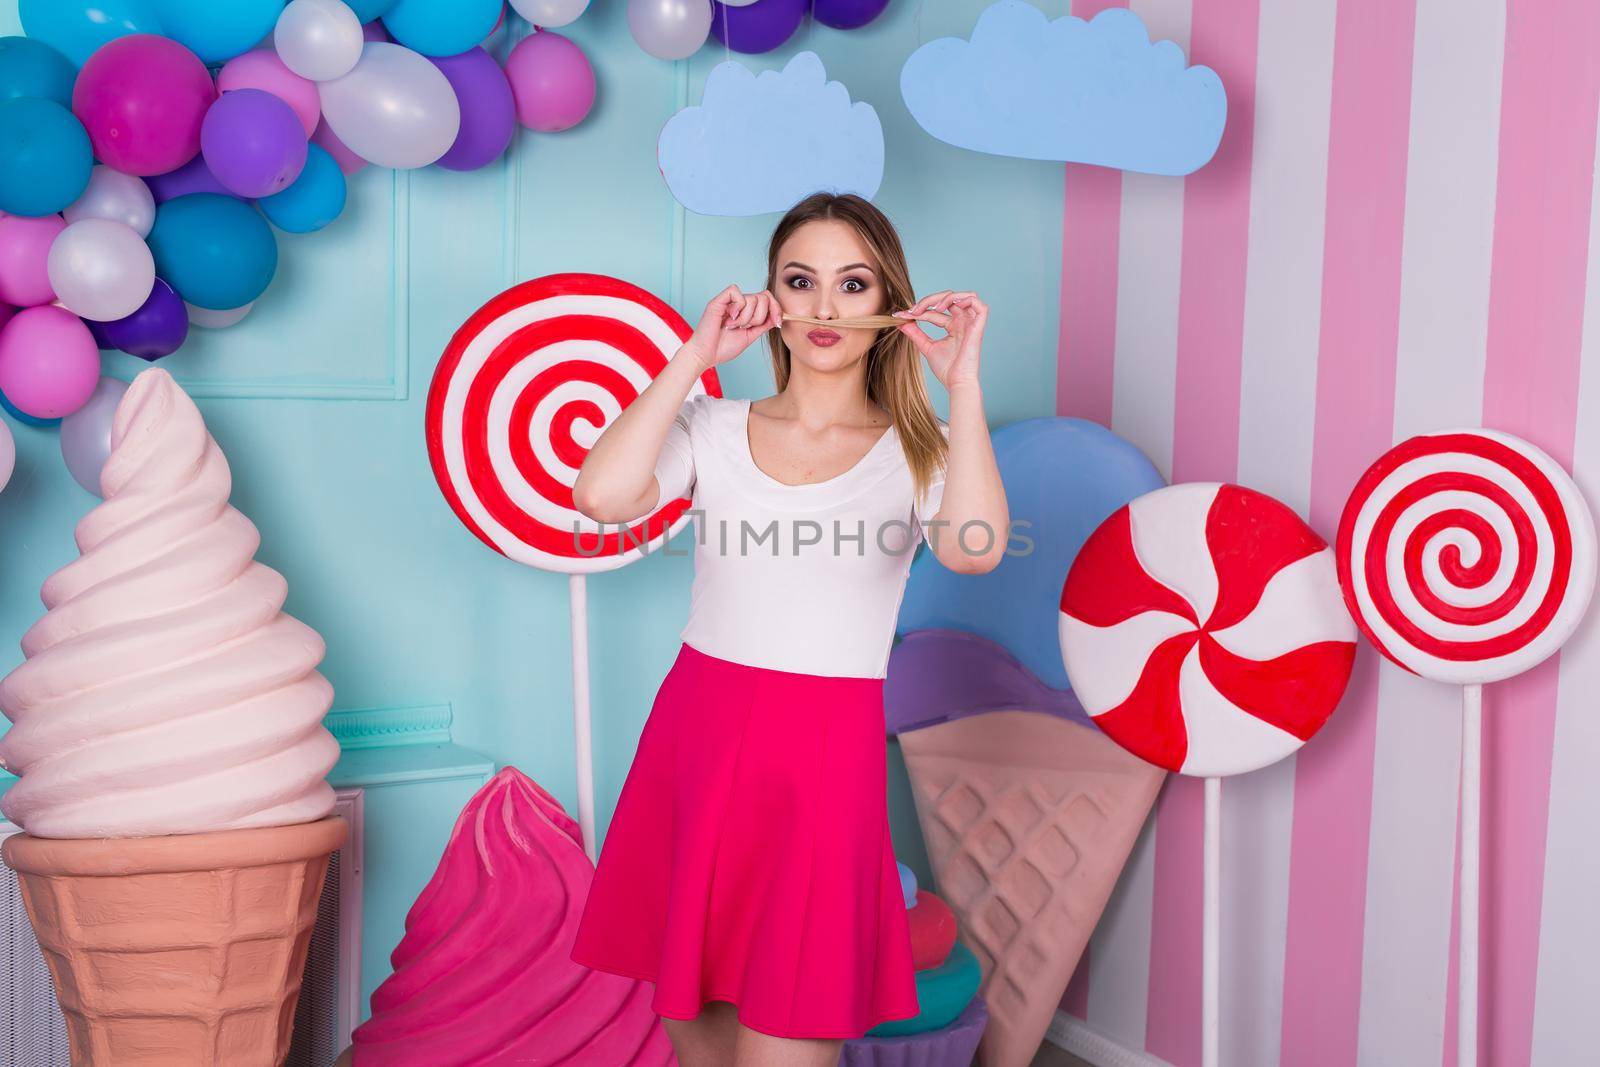 Portrait of joyful young woman in pink dress on background decorated with huge candies and ice cream by StudioPeace